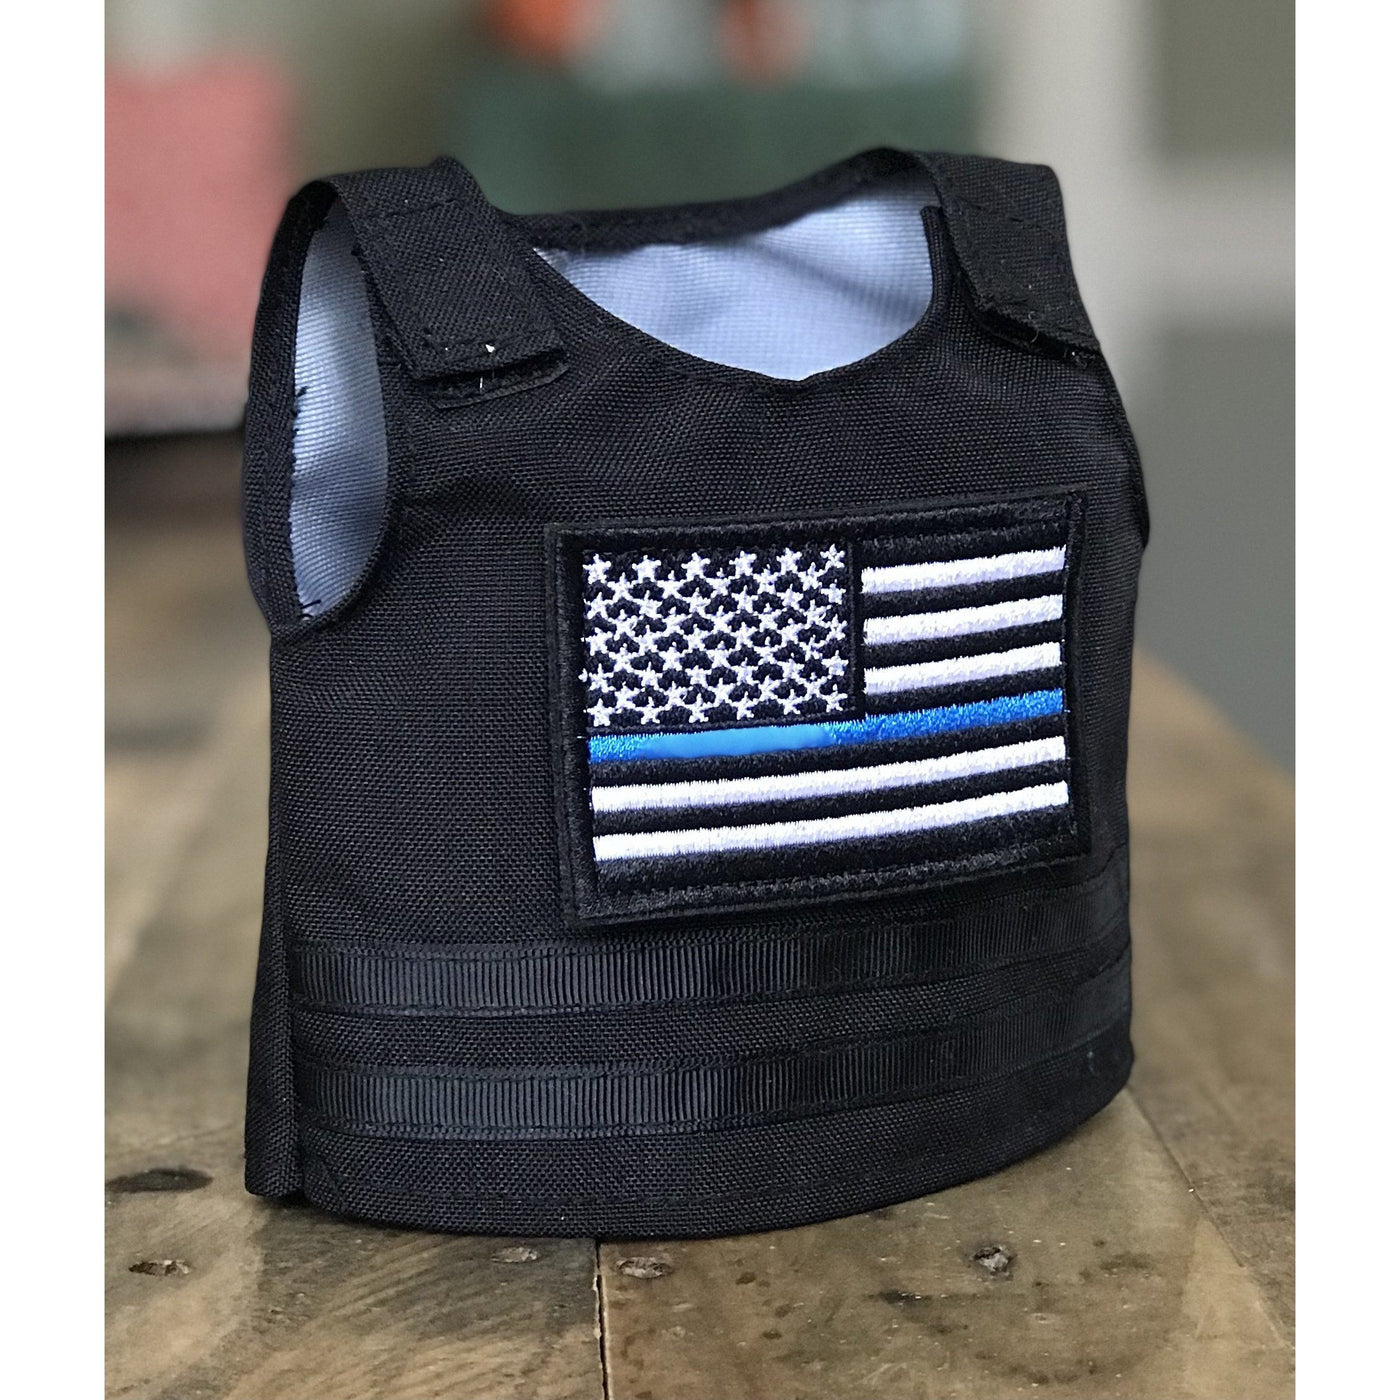 Tacticuddle Vest with Police patch